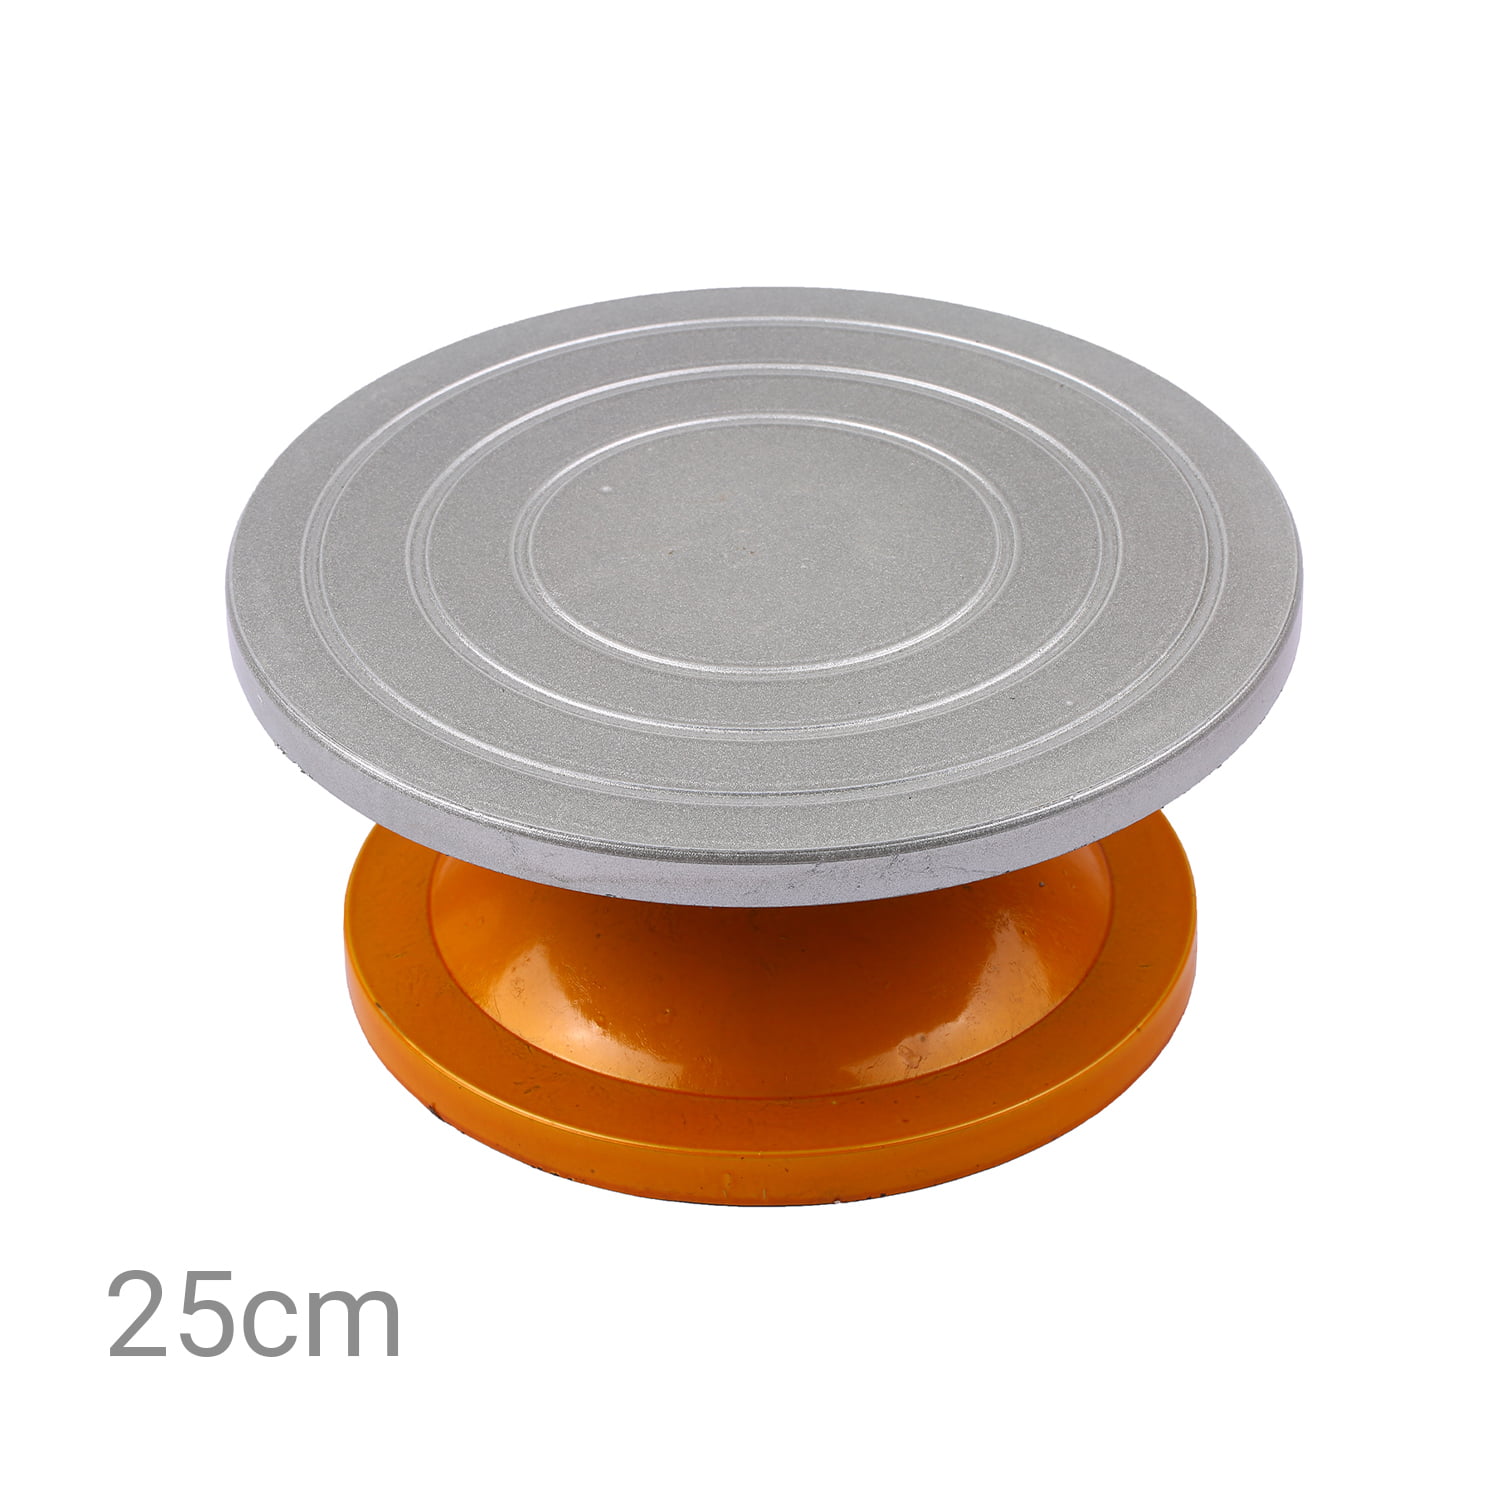 Pottery Wheel Turntable Professional Metal Ceramic Machine Sculpting Wheel Rotating Table for Flower Arrangement Model Making Clay Design Cake Decoration 1#